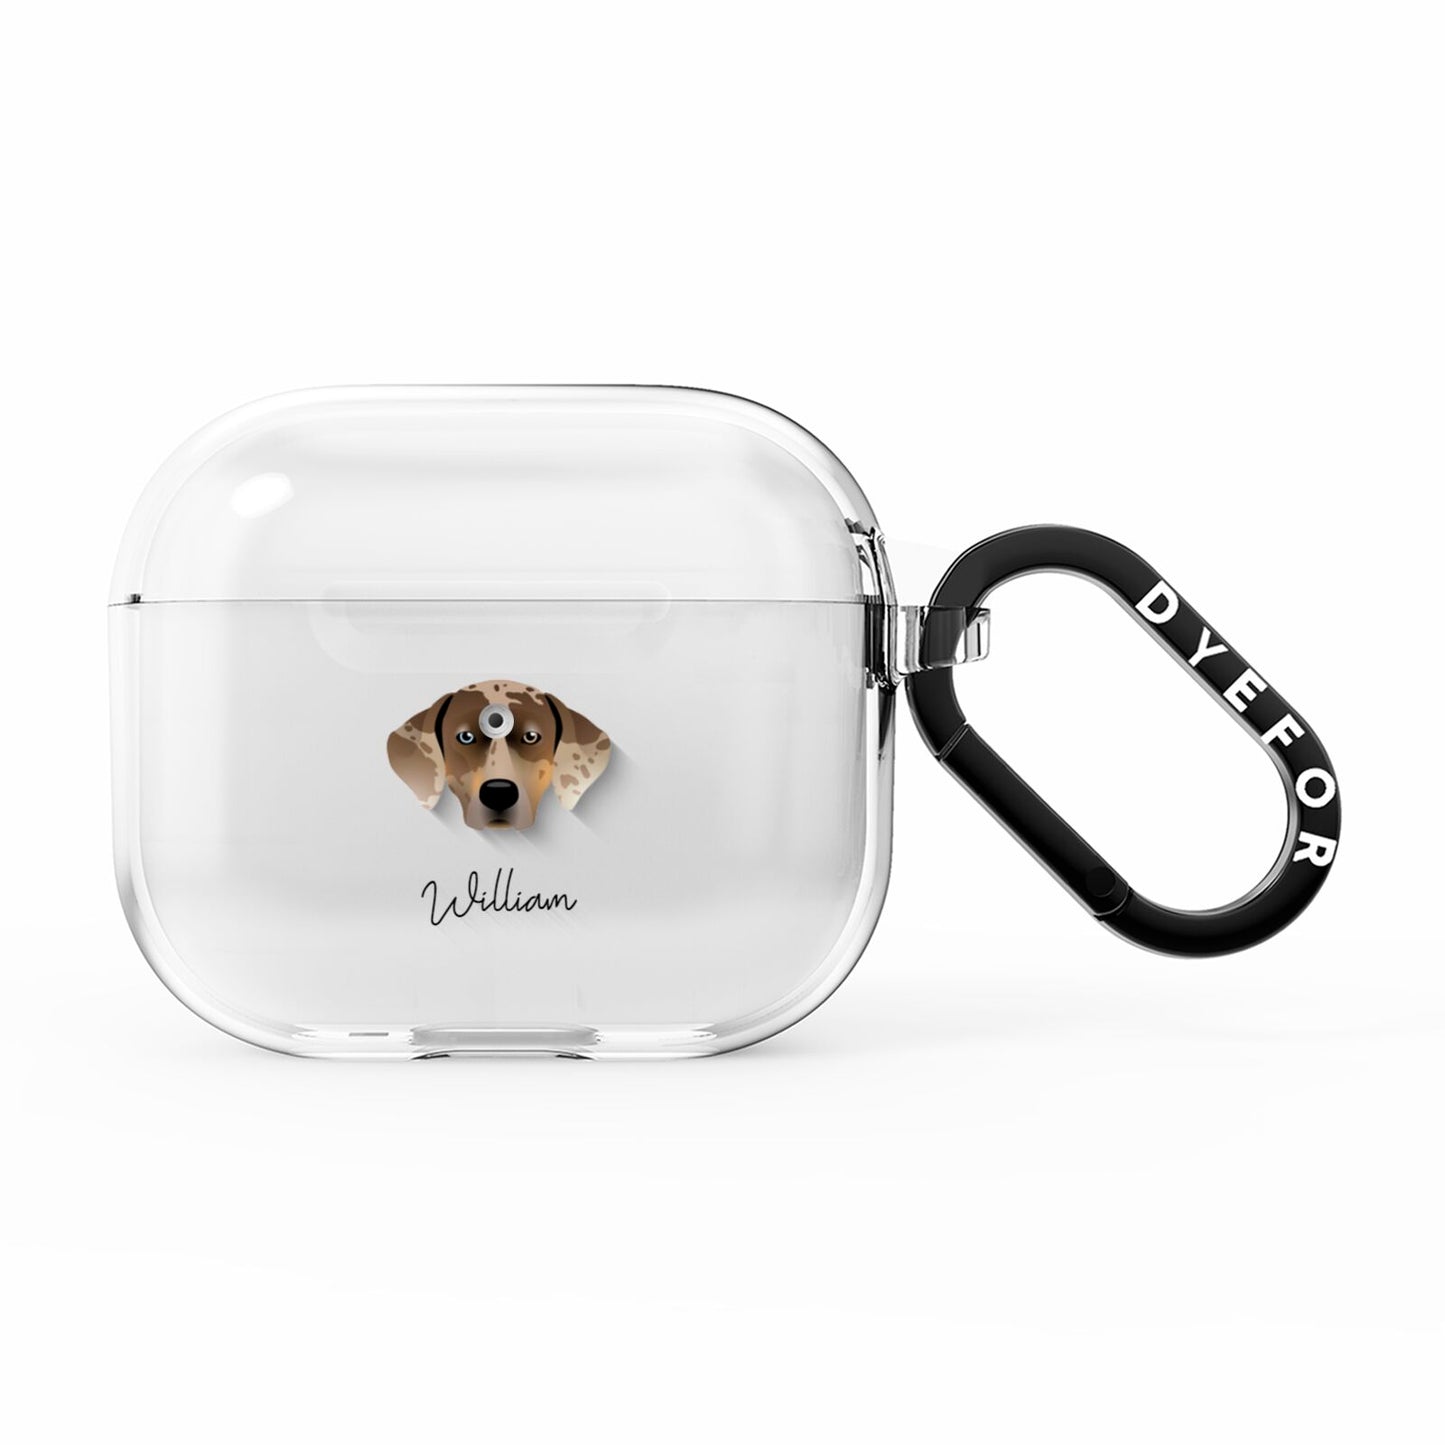 Catahoula Leopard Dog Personalised AirPods Clear Case 3rd Gen